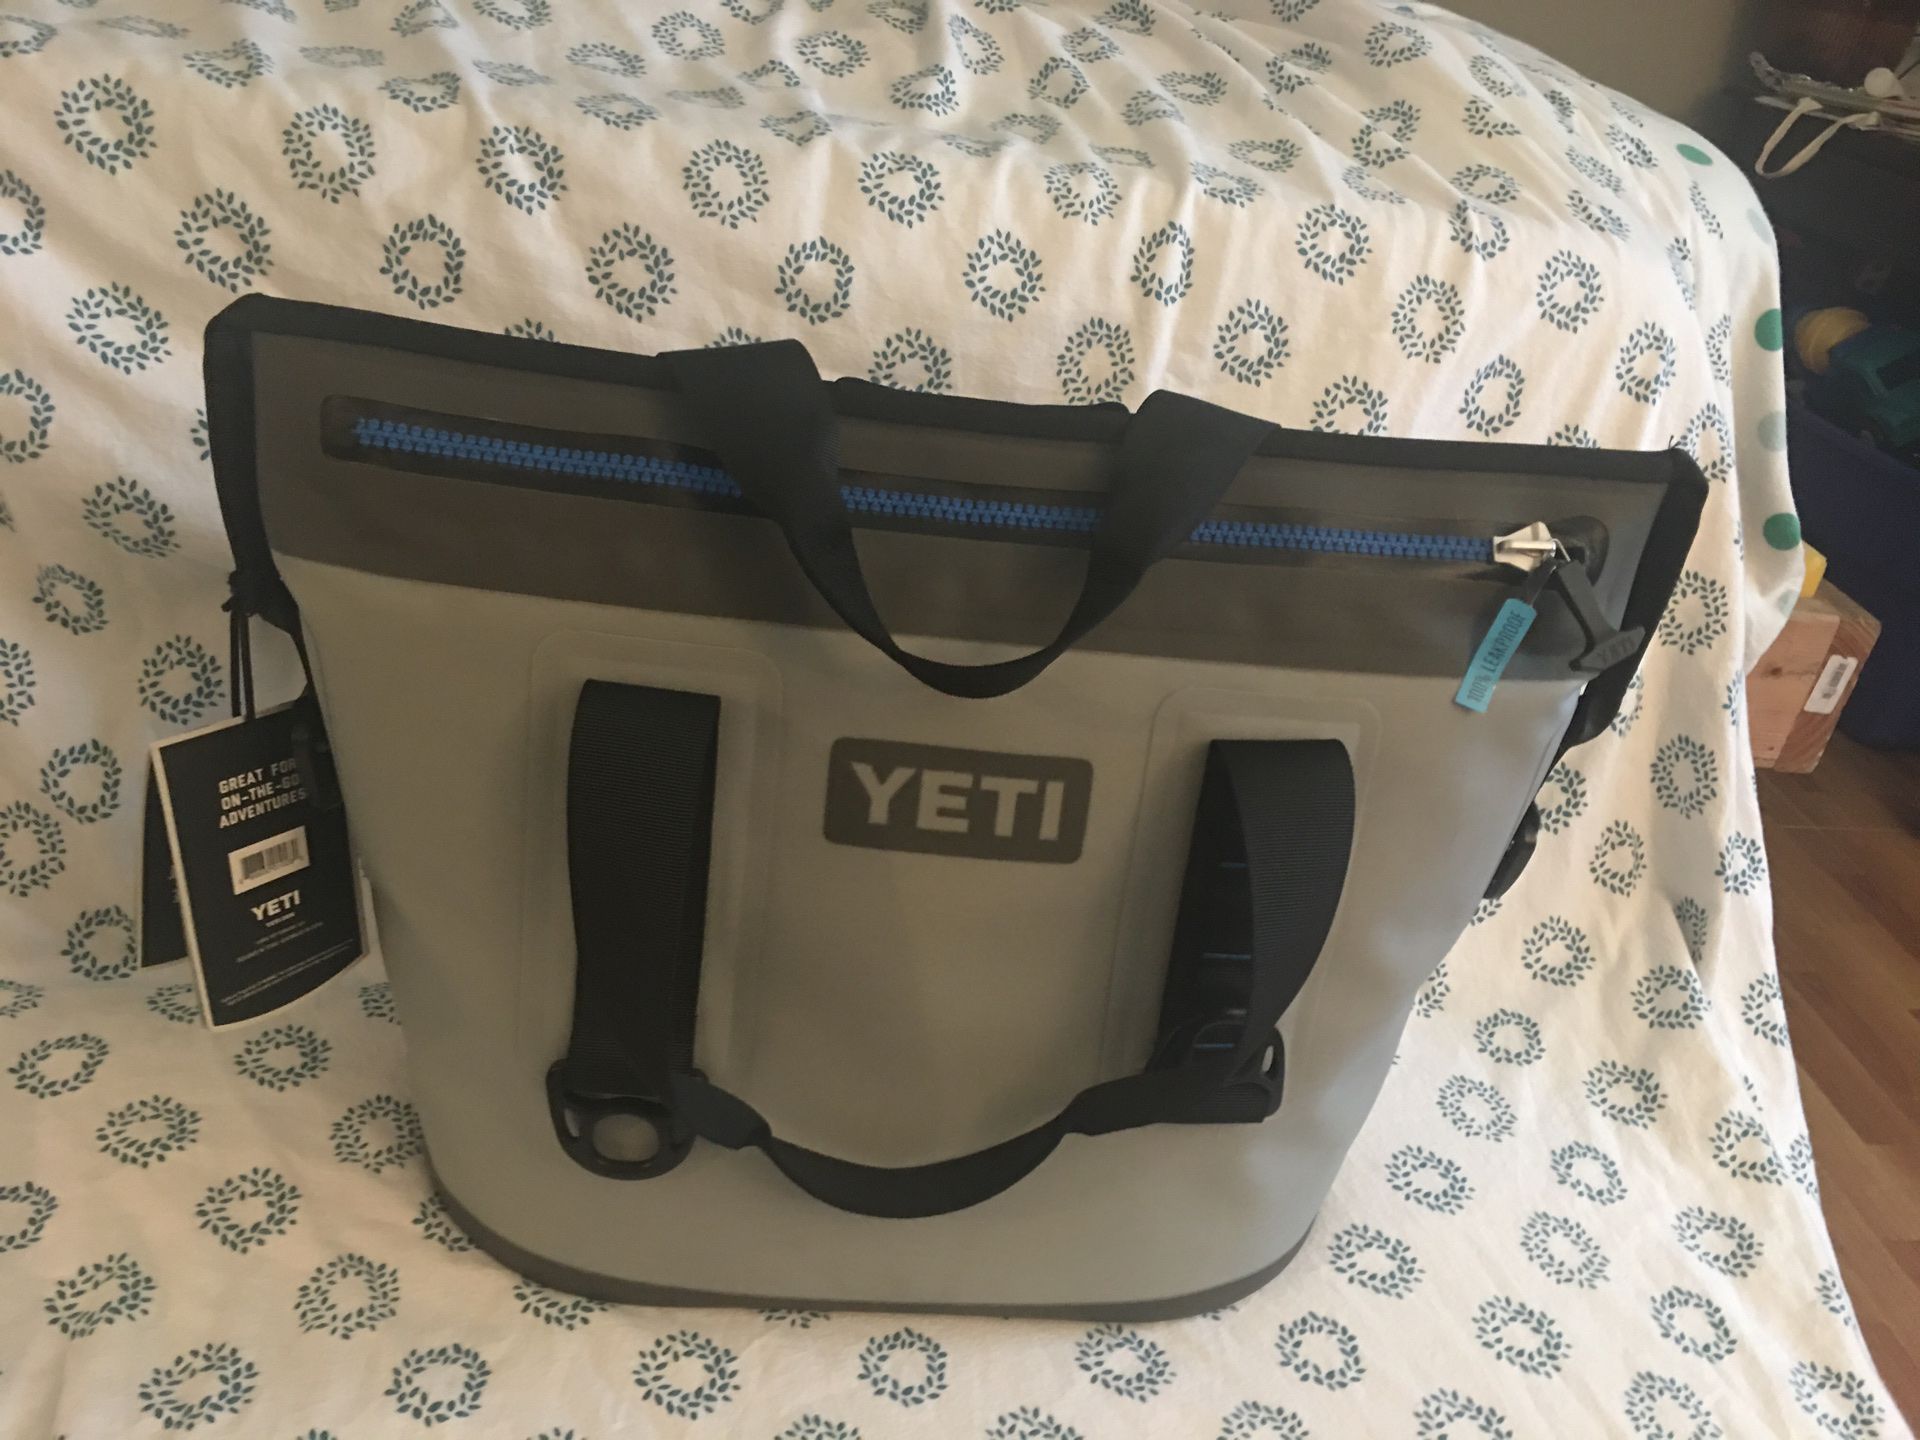 Yety Hopper two cooler